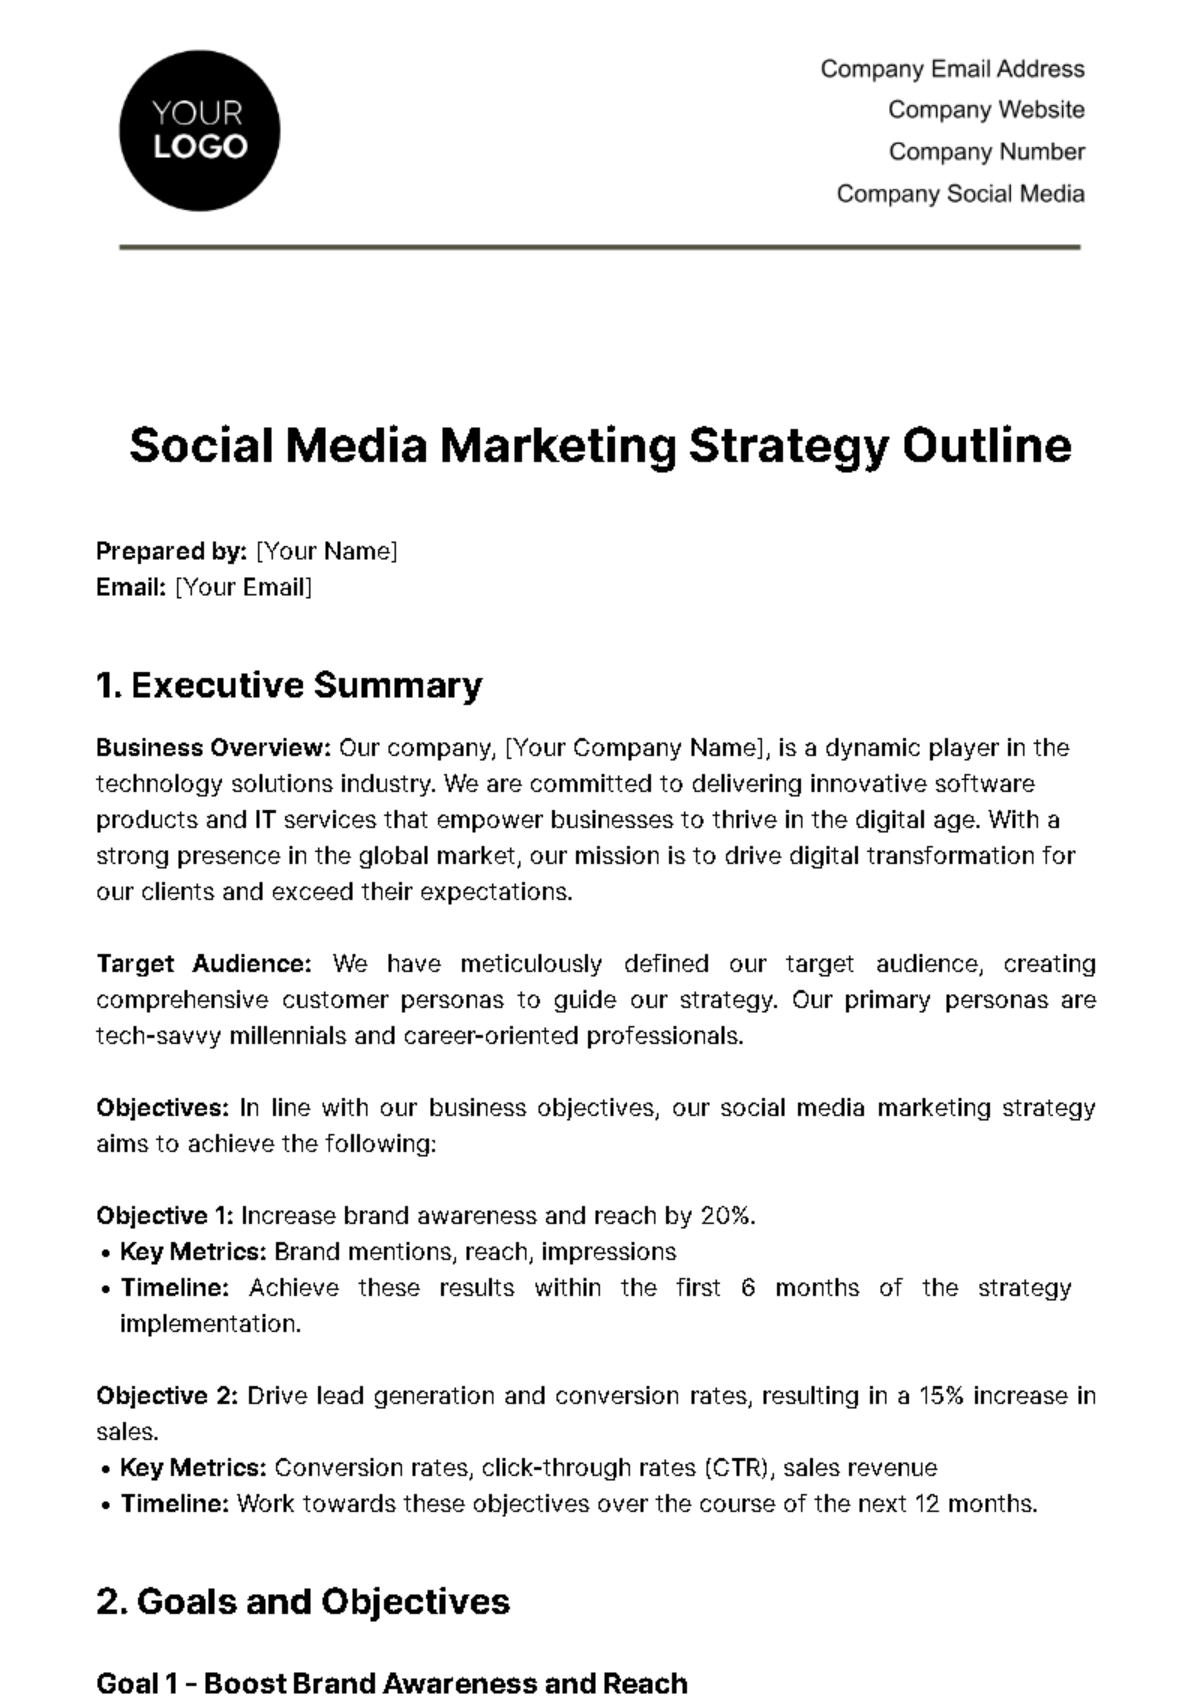 Free Social Media Marketing Strategy Outline Template